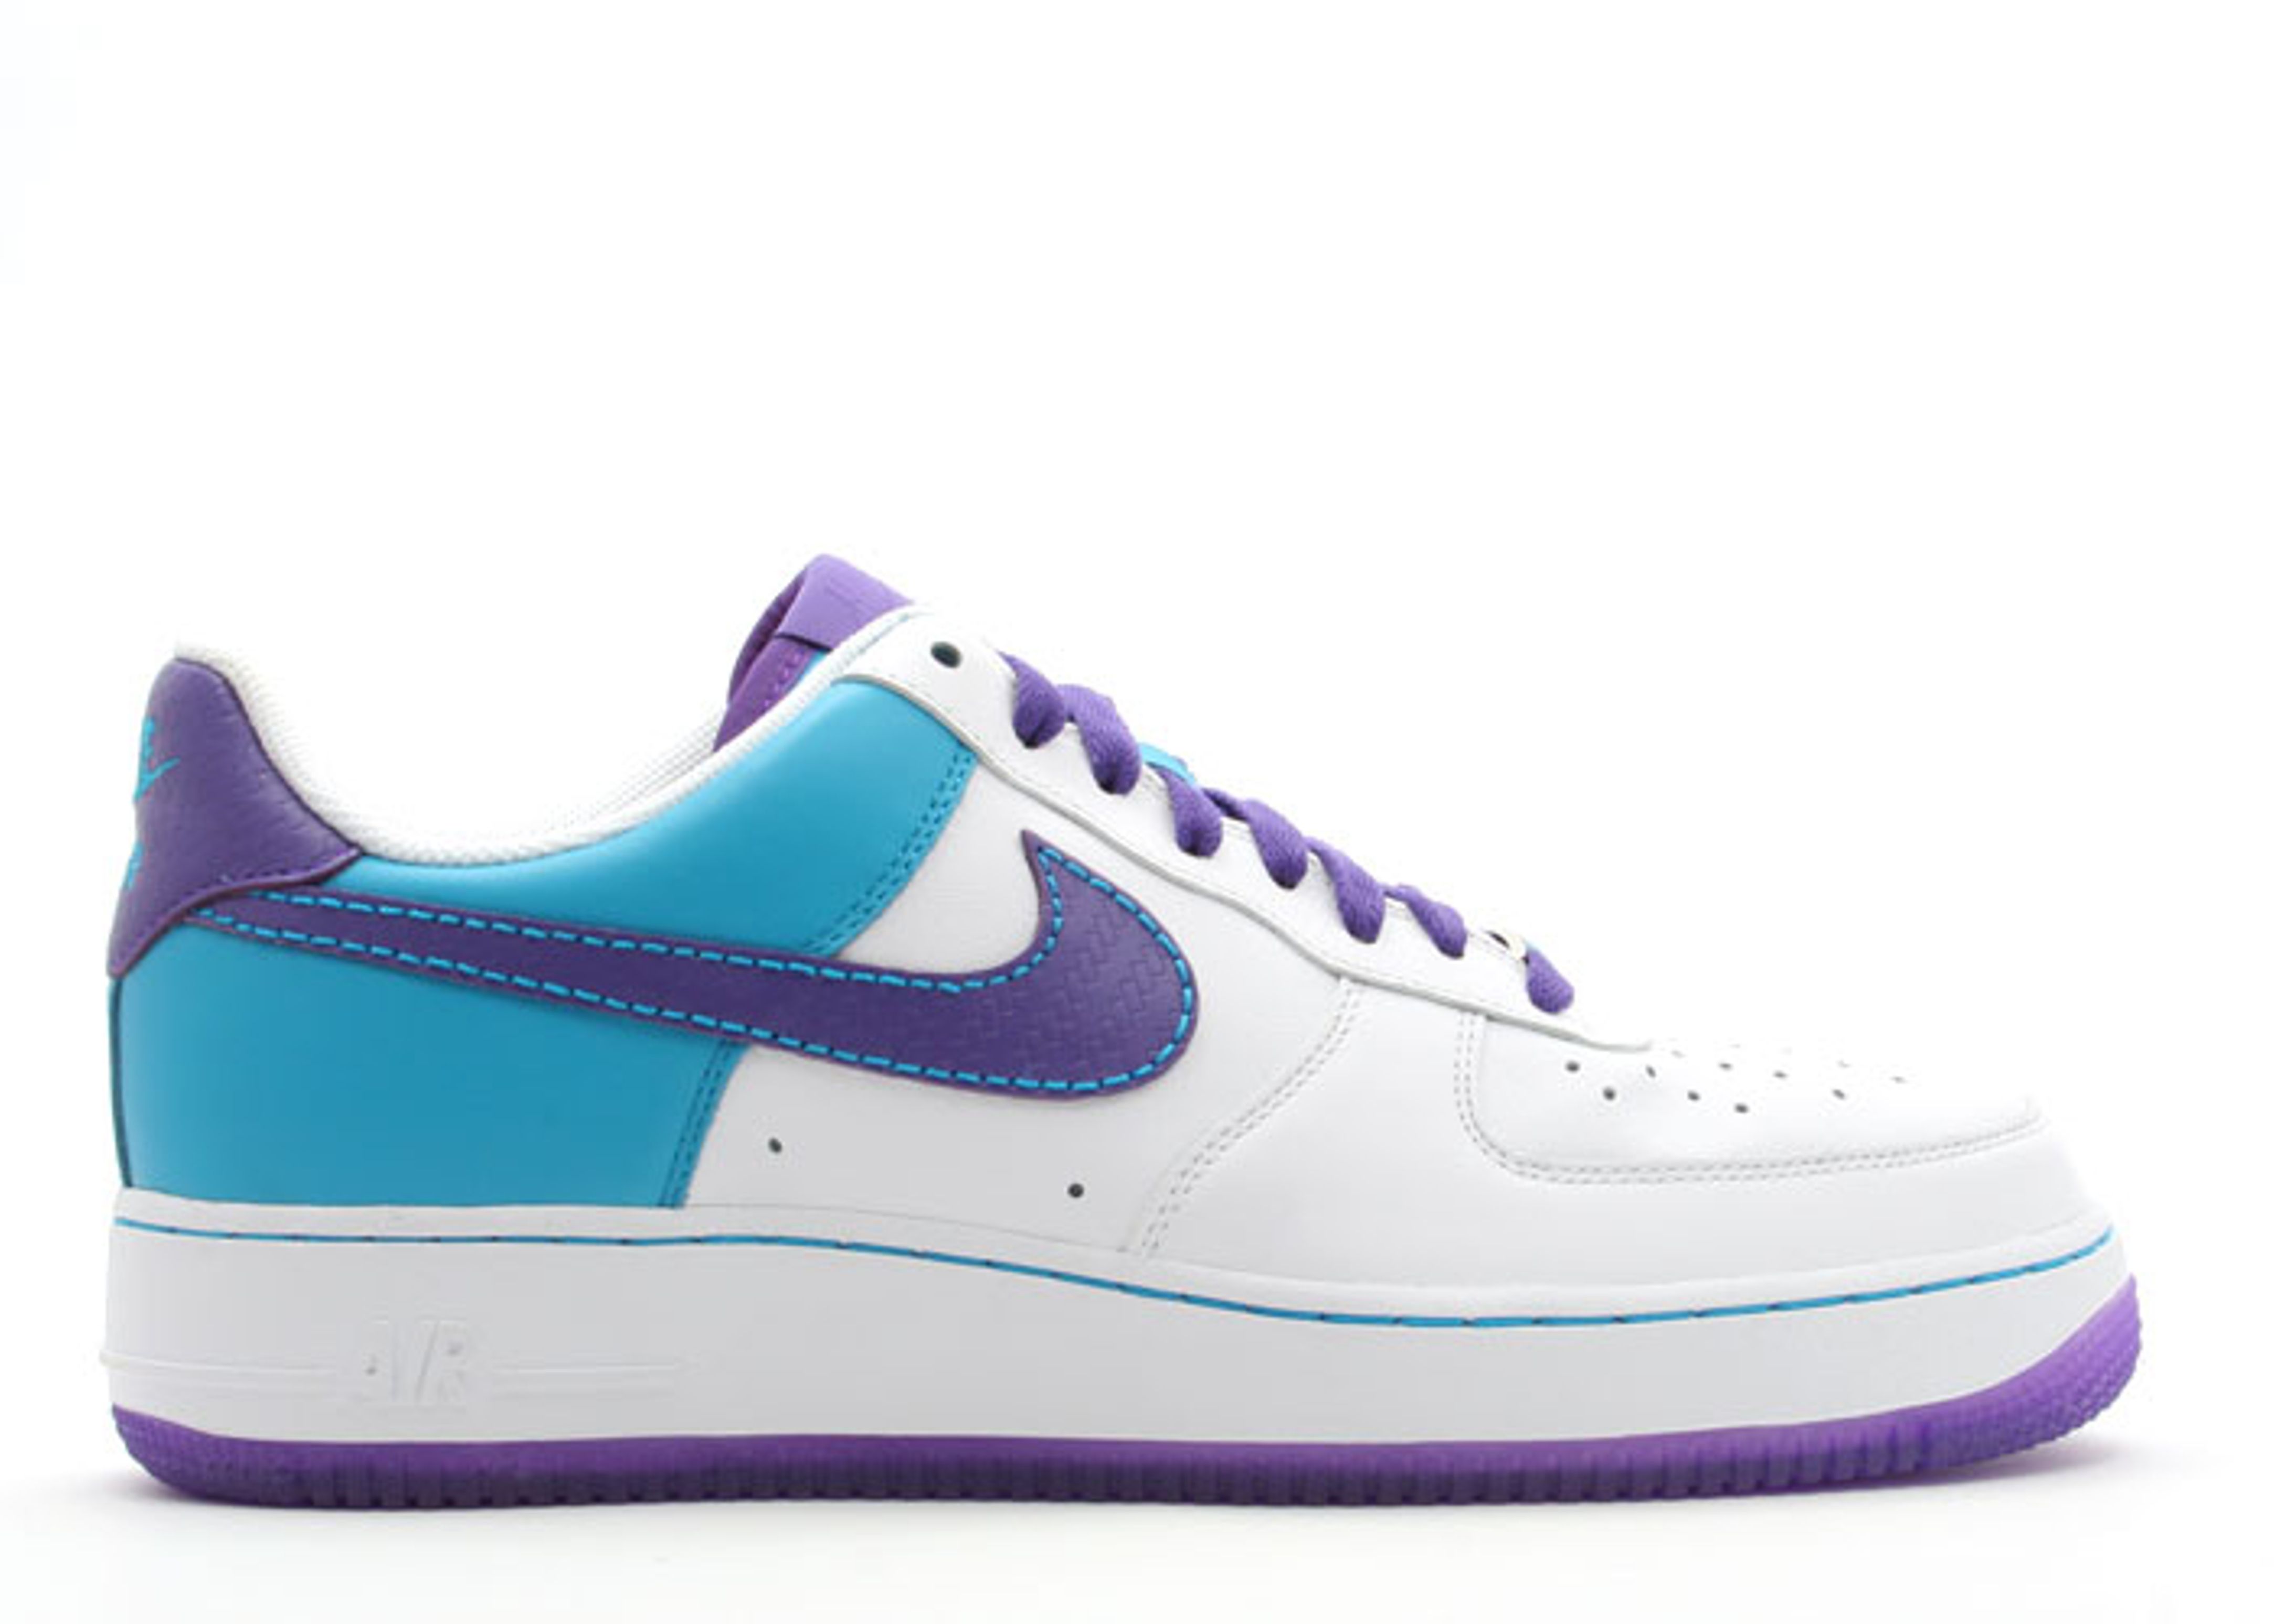 purple and white air force ones